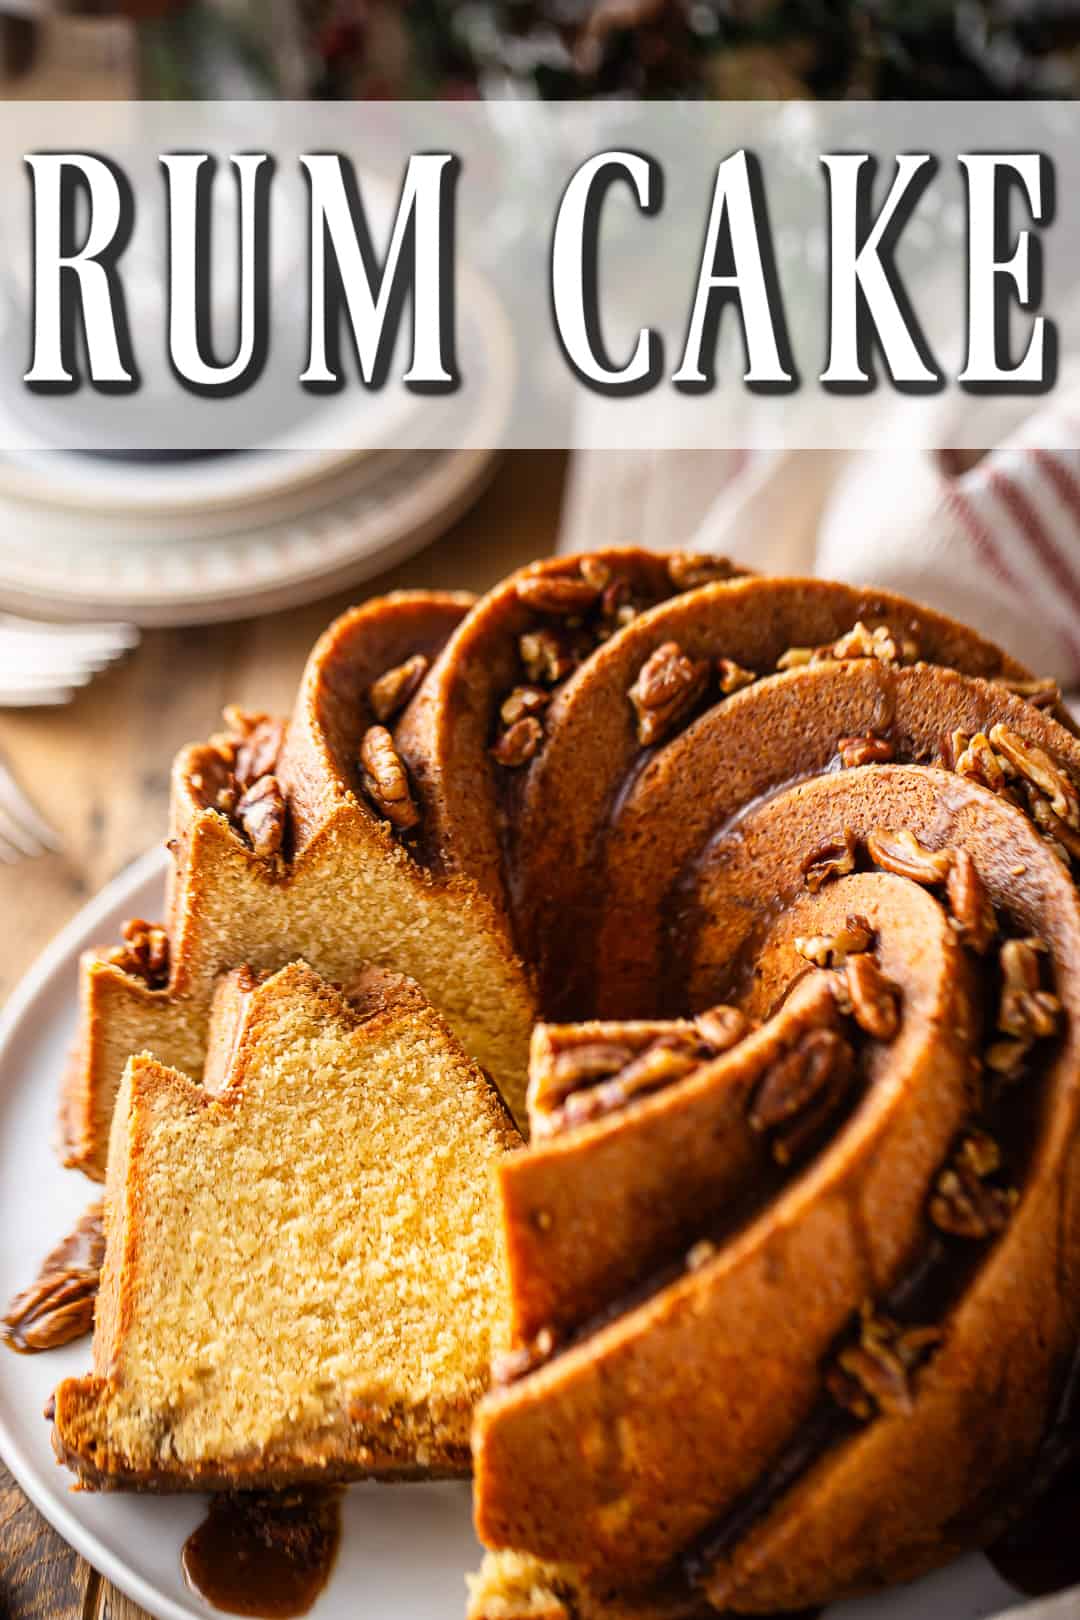 Rum cake recipe, baked in a spiral bundt pan and drizzled with buttery rum pecan glaze.